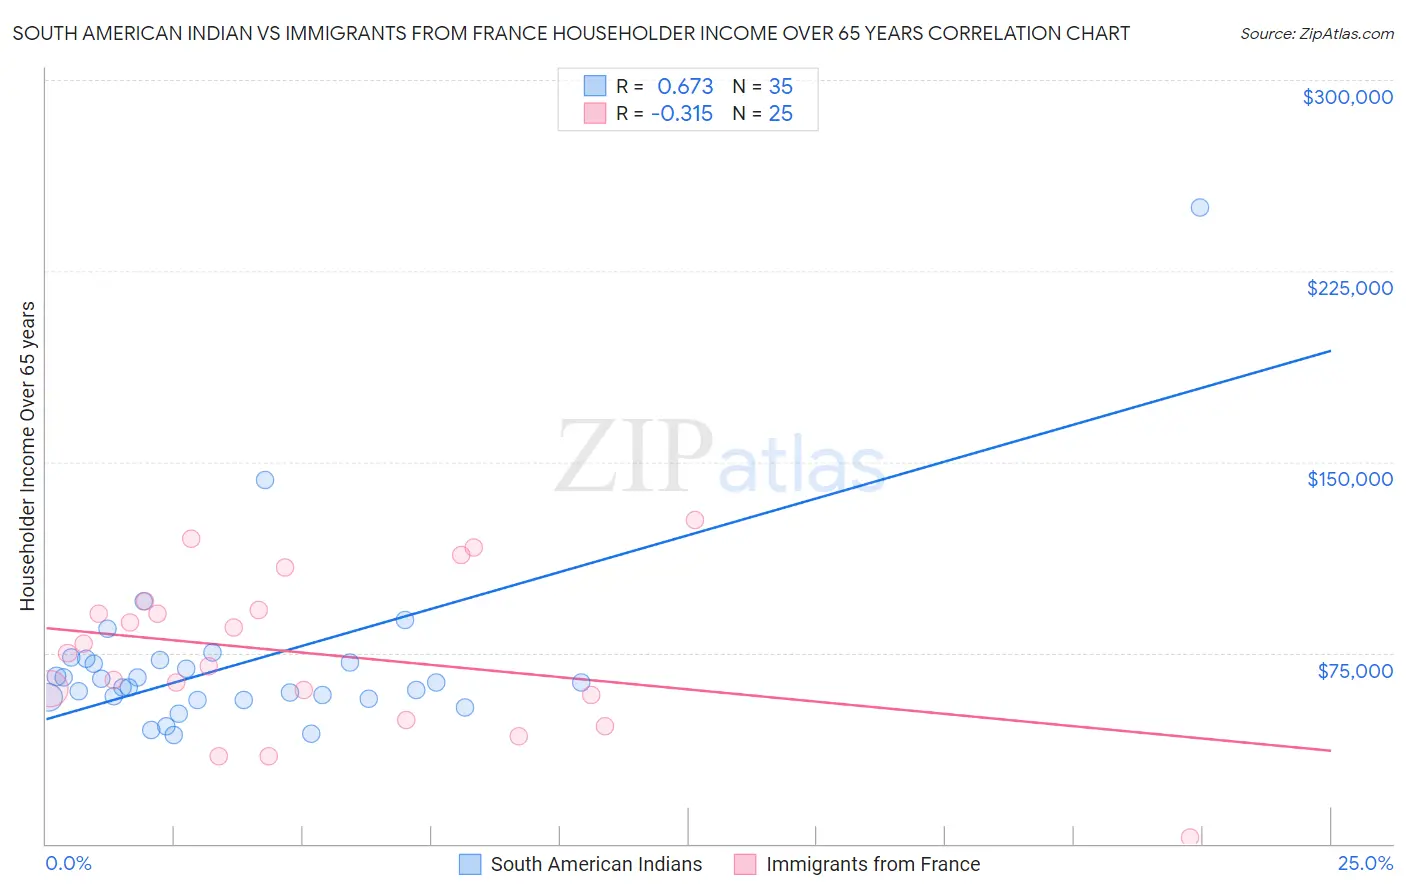 South American Indian vs Immigrants from France Householder Income Over 65 years